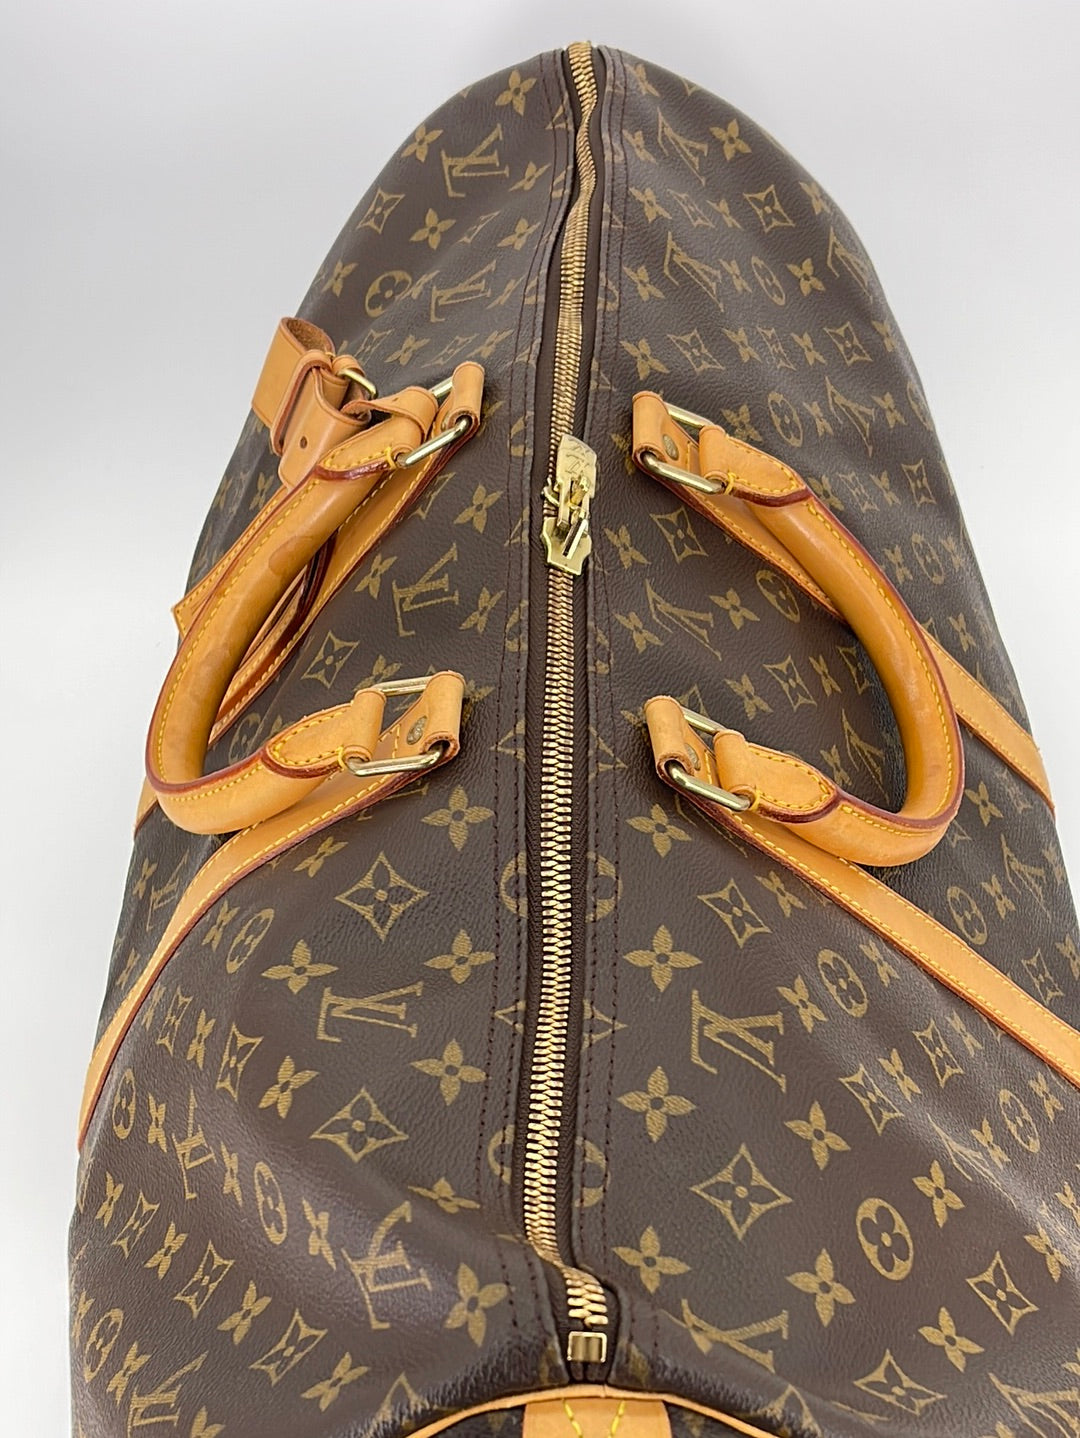 Louis Vuitton 1988 pre-owned Keepall 55 travel bag - ShopStyle